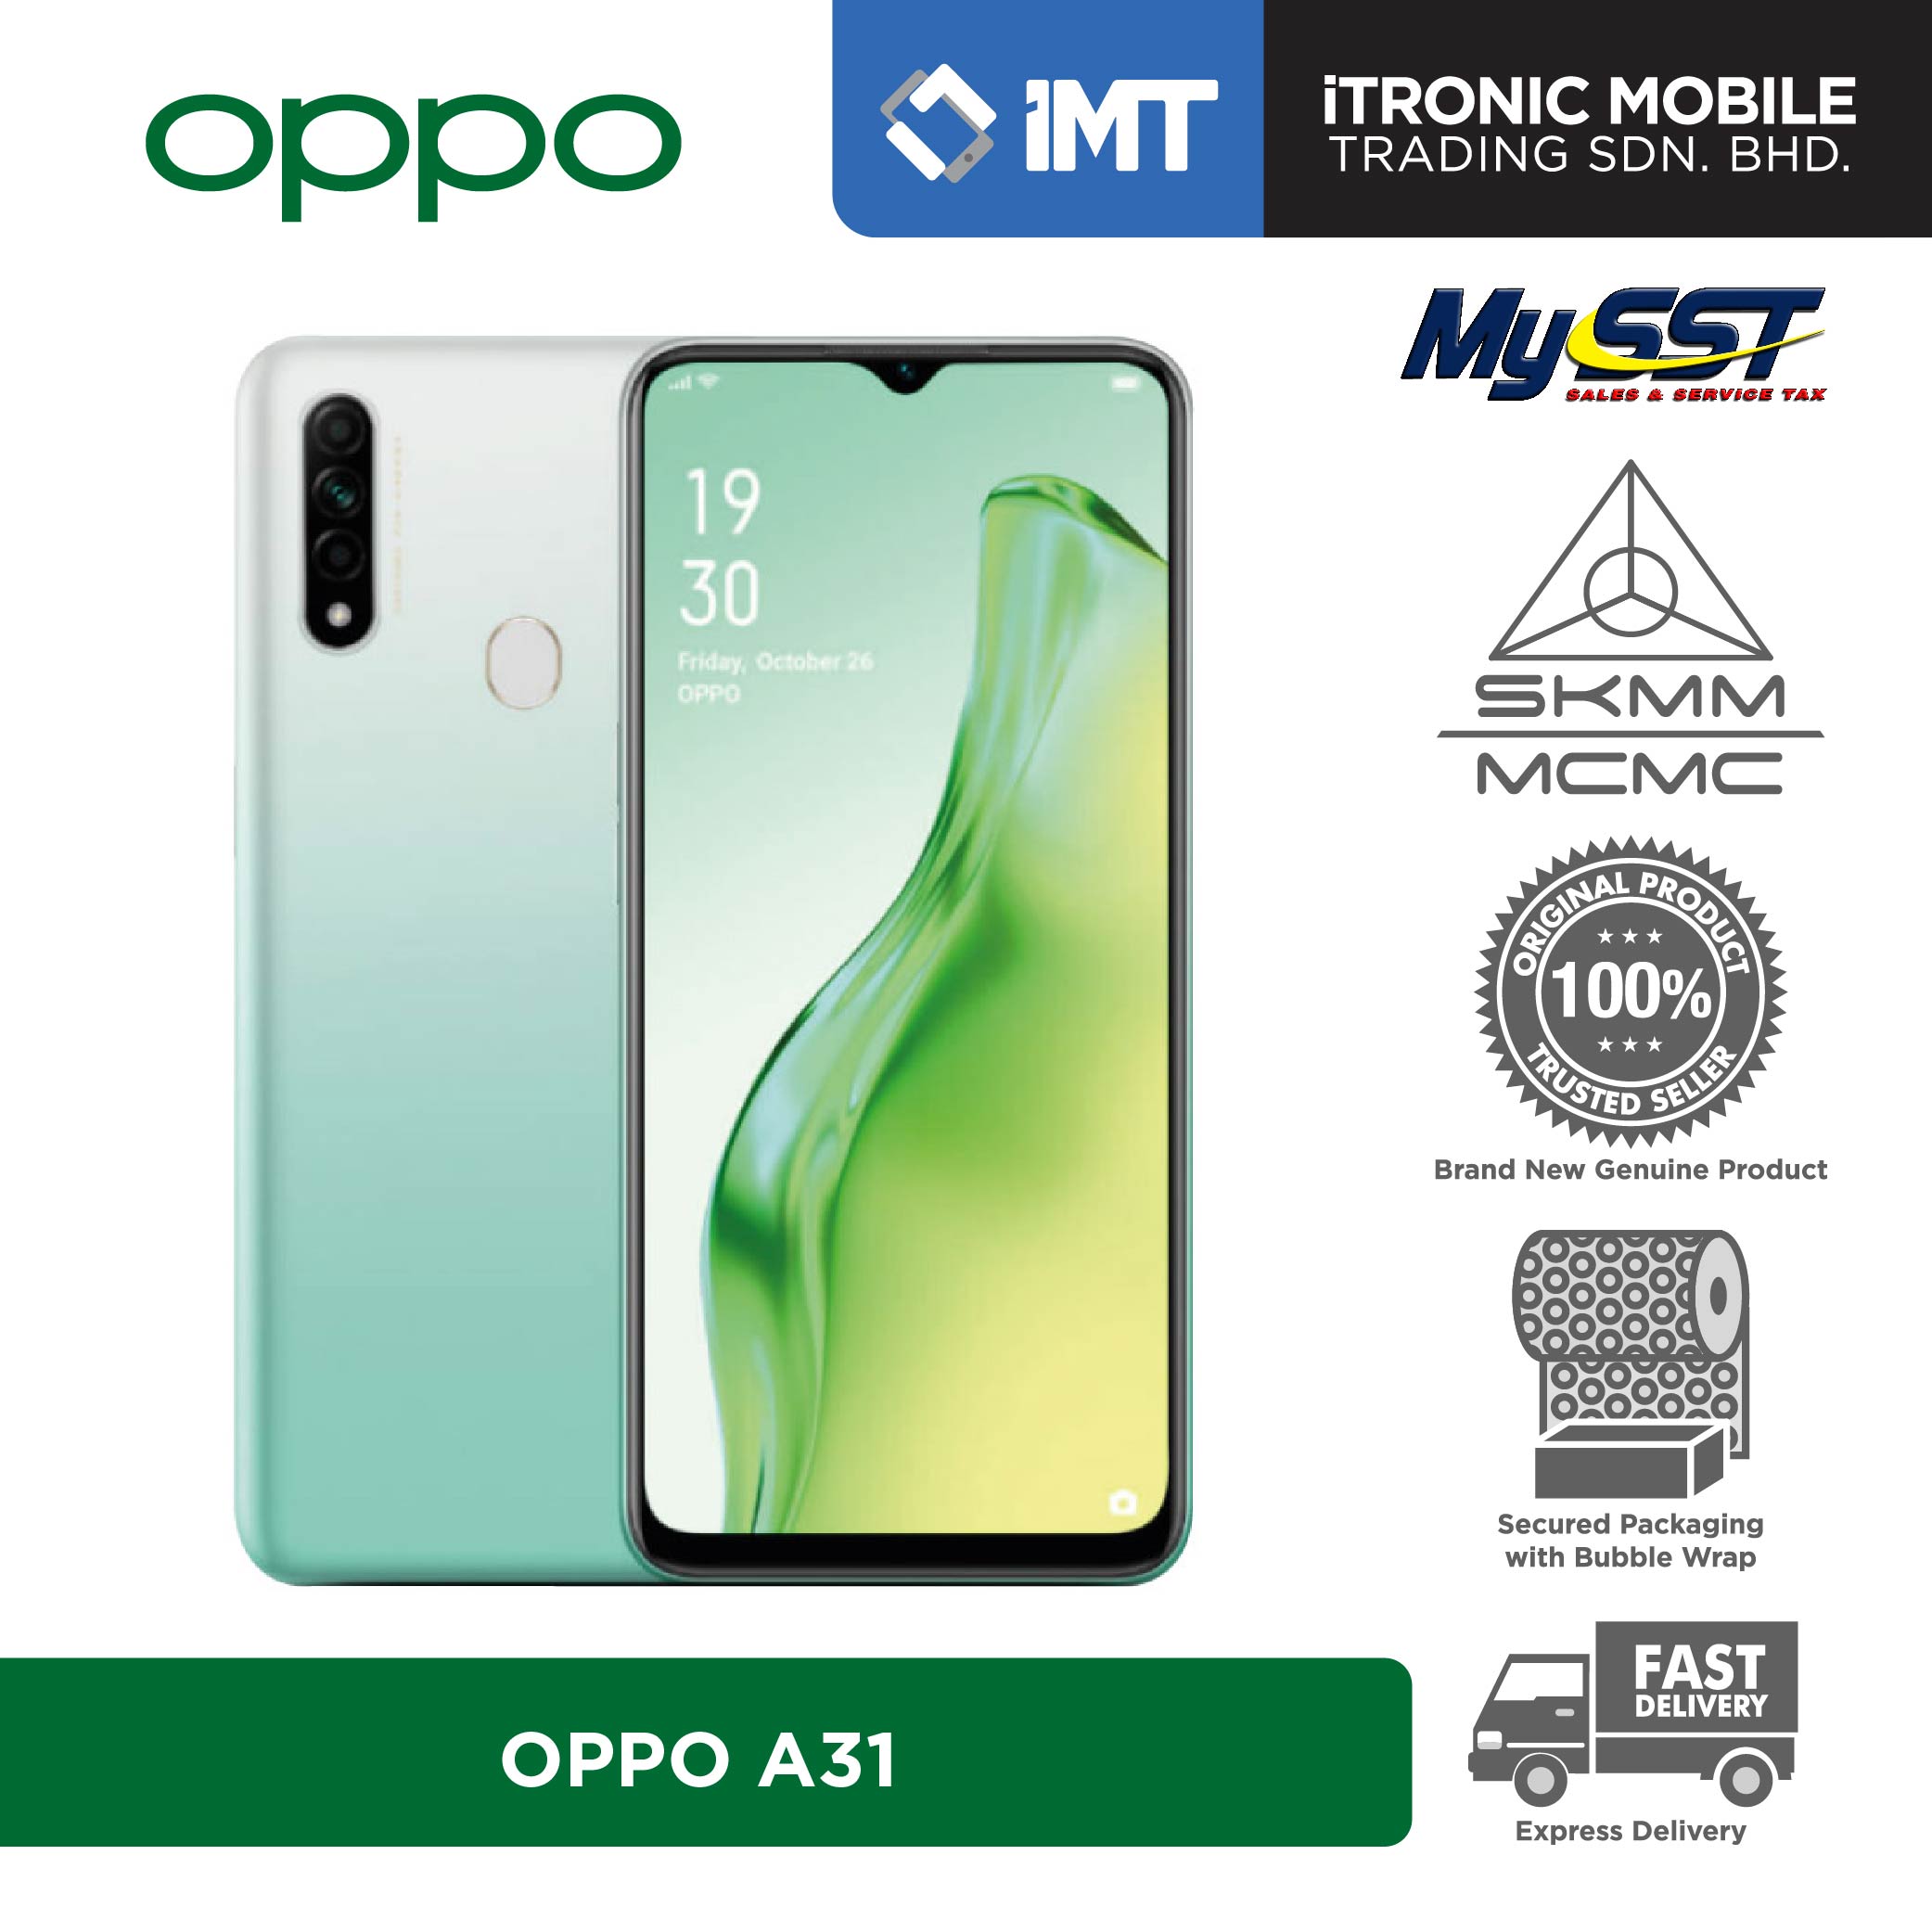 Oppo A31 Price In Malaysia : Oppo A31 2020 Price In India